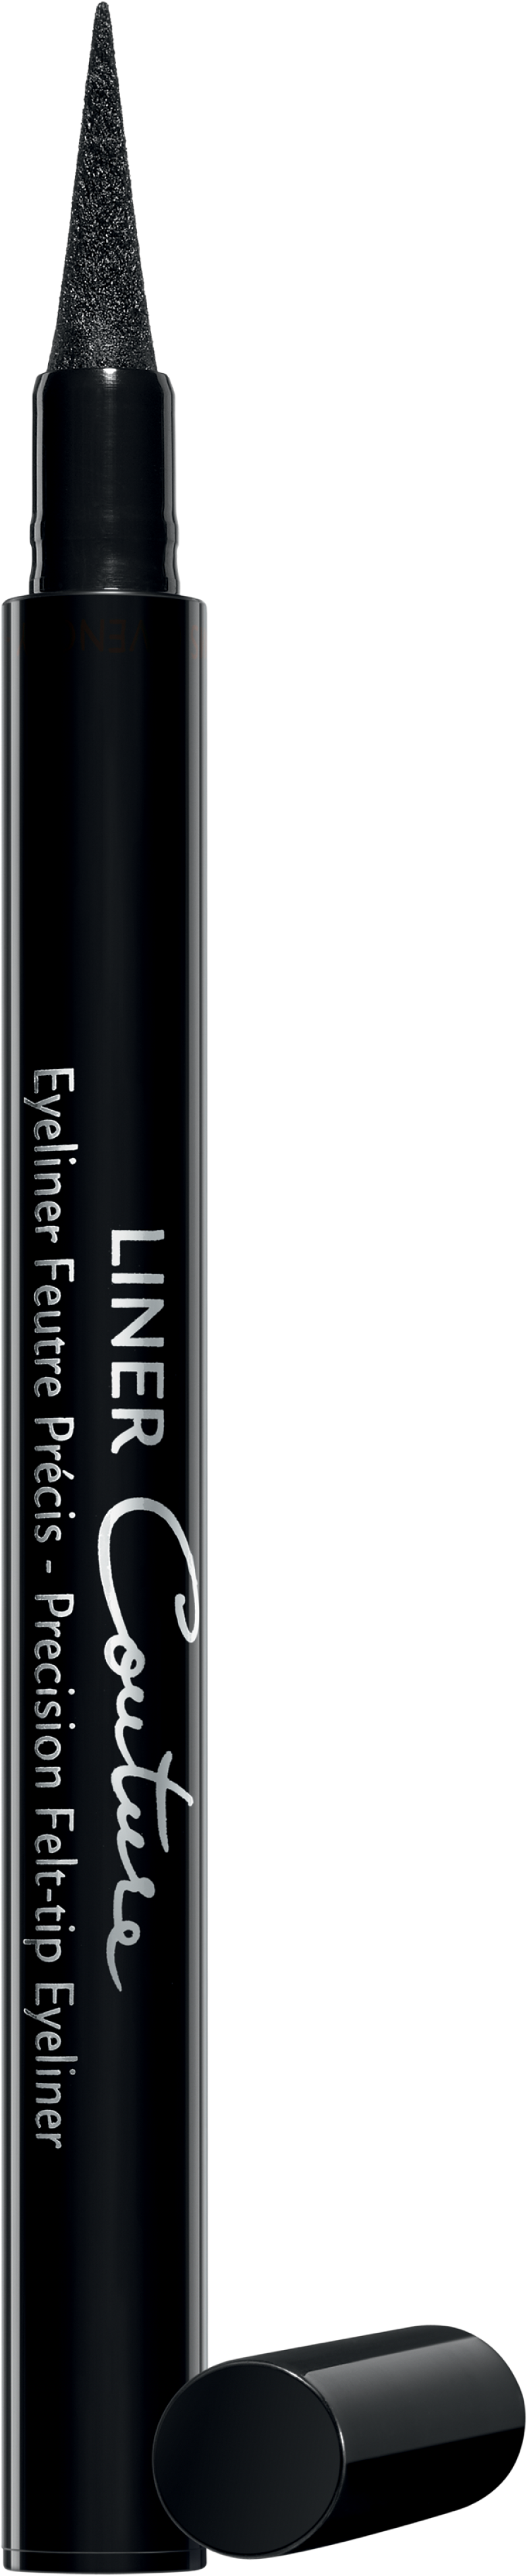 givenchy_liner_couture_precision